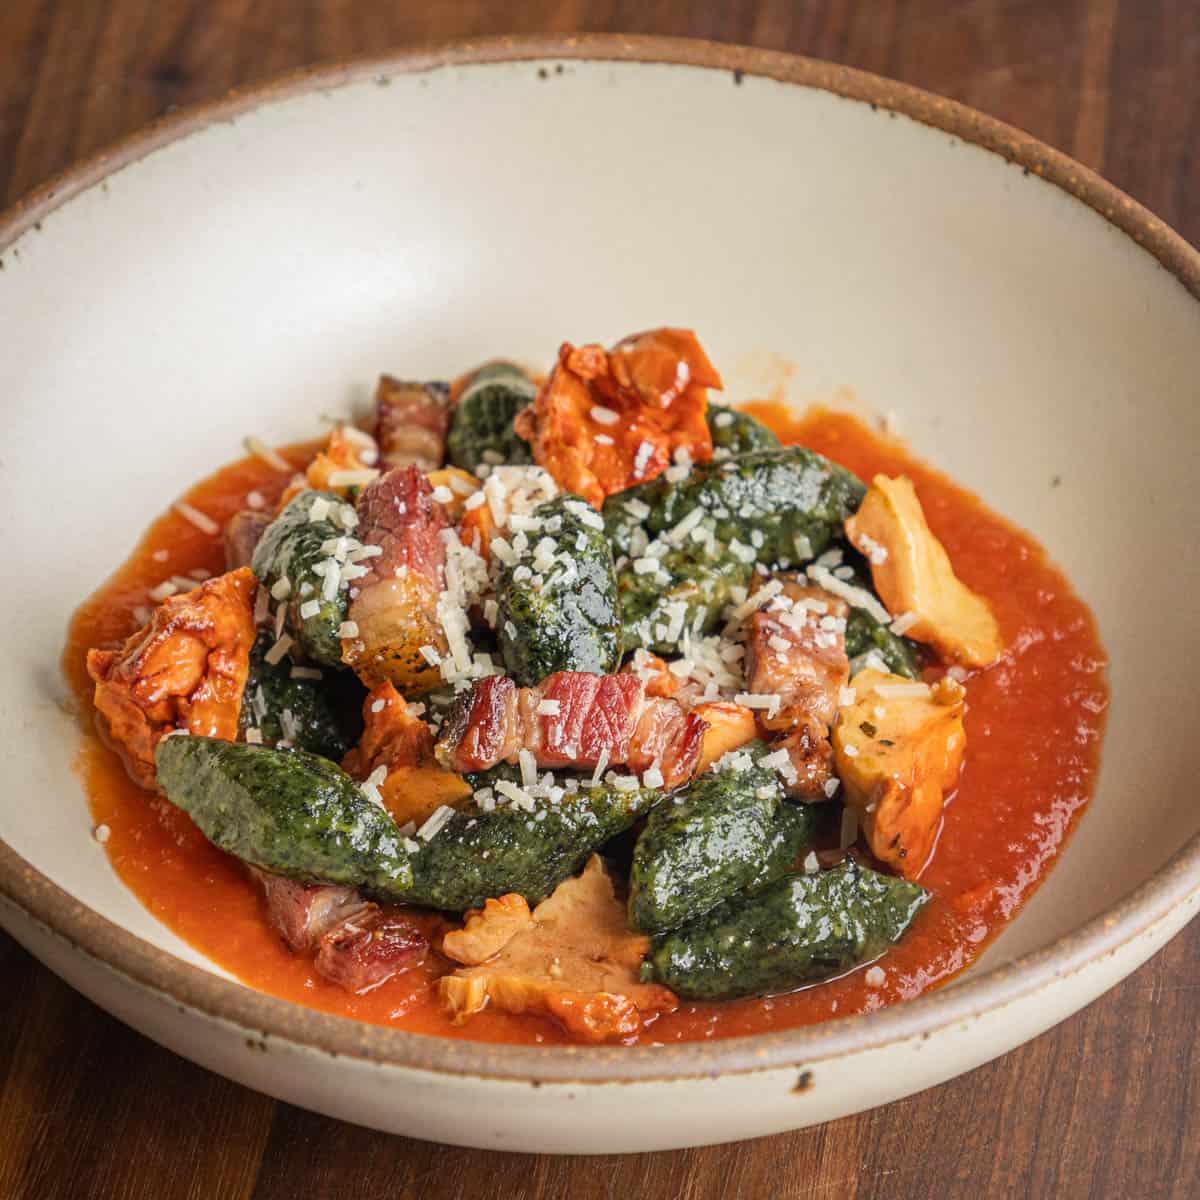 A bowl of green gnocchi with beef bacon and mushrooms on a bed of tomato sauce.